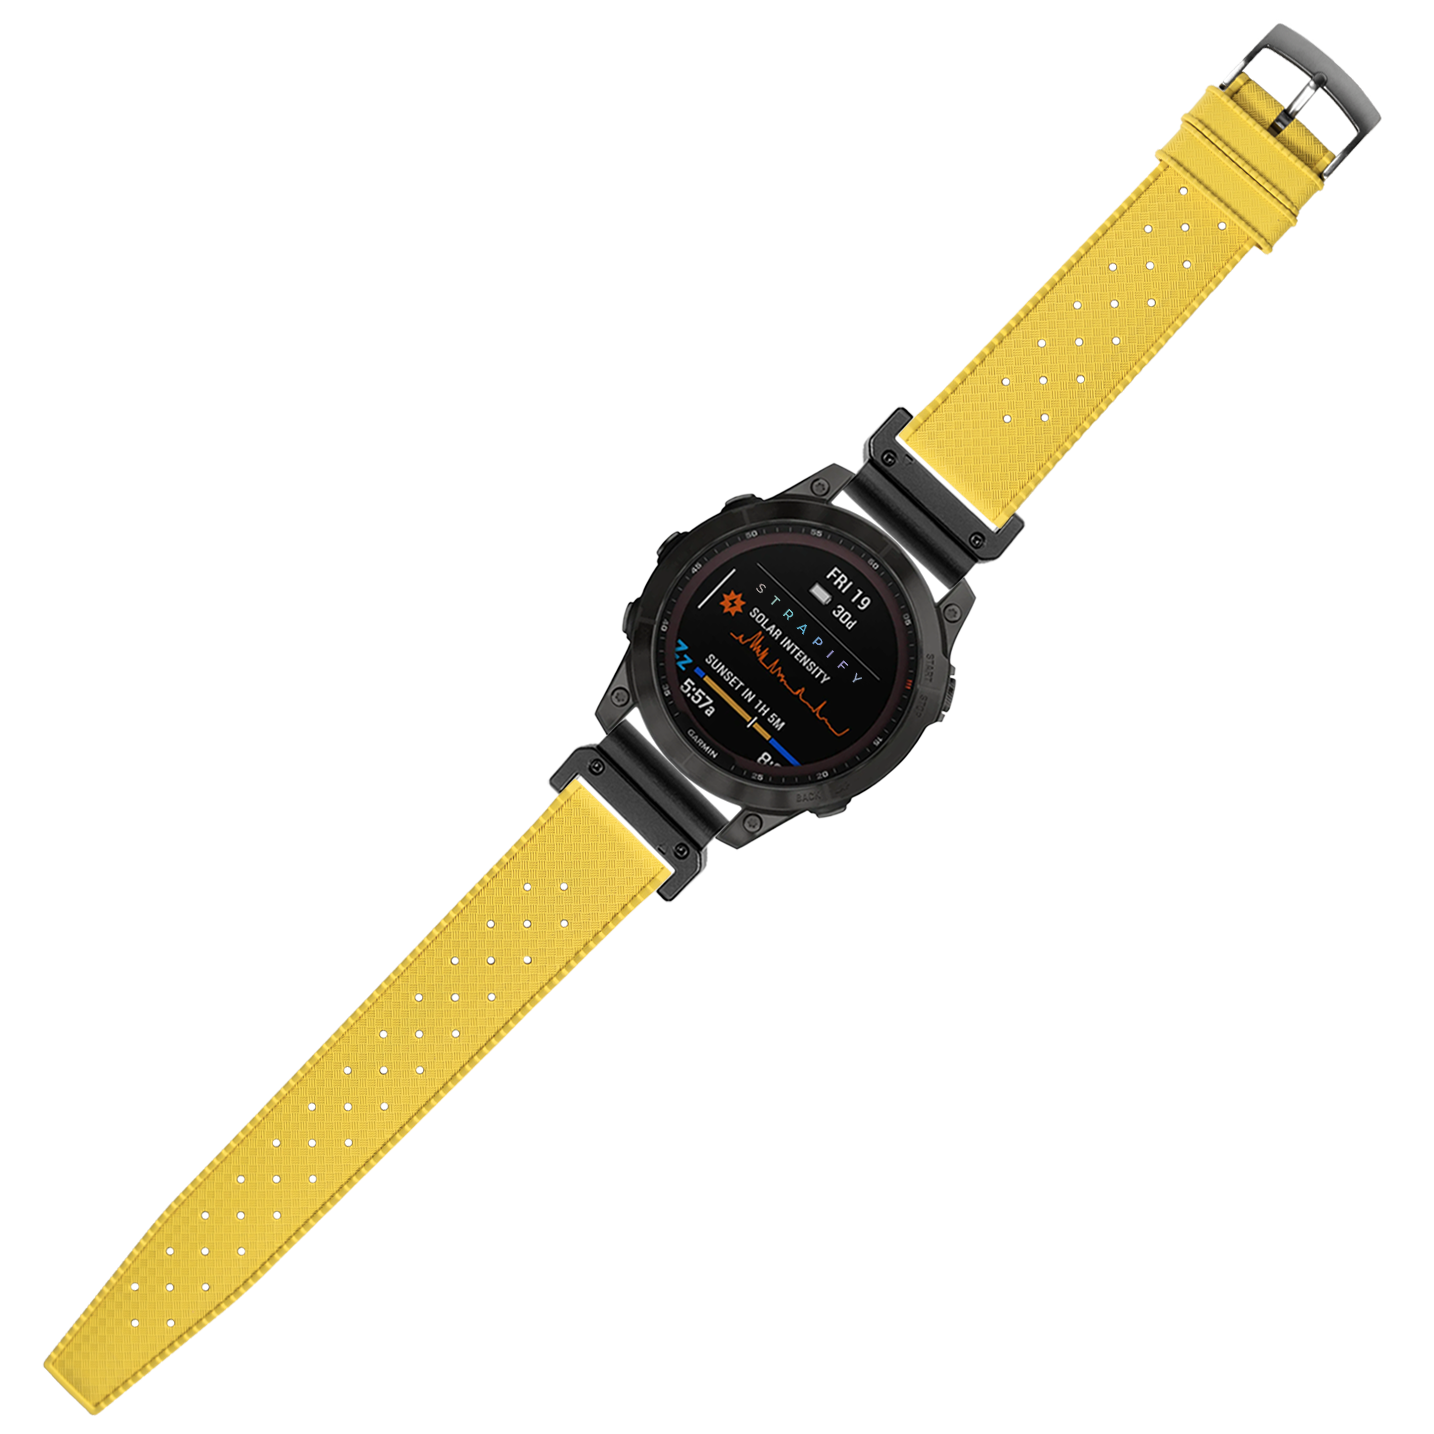 [QuickFit] King Tropic FKM Rubber - Yellow 26mm